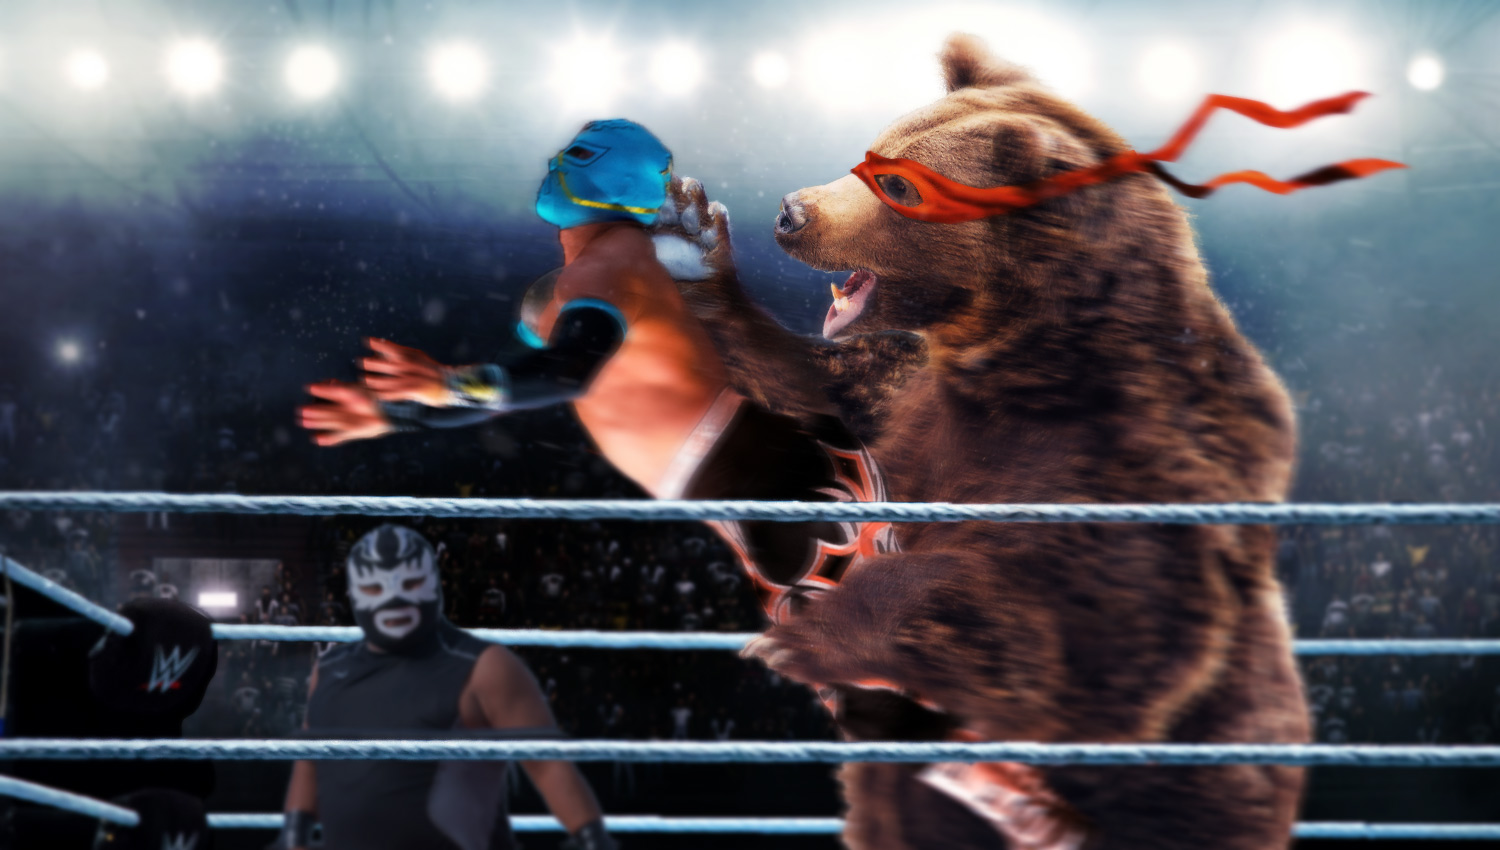 Grizzly Bear Shatters All Pro Wrestling Records After Identifying As Human1500 x 850